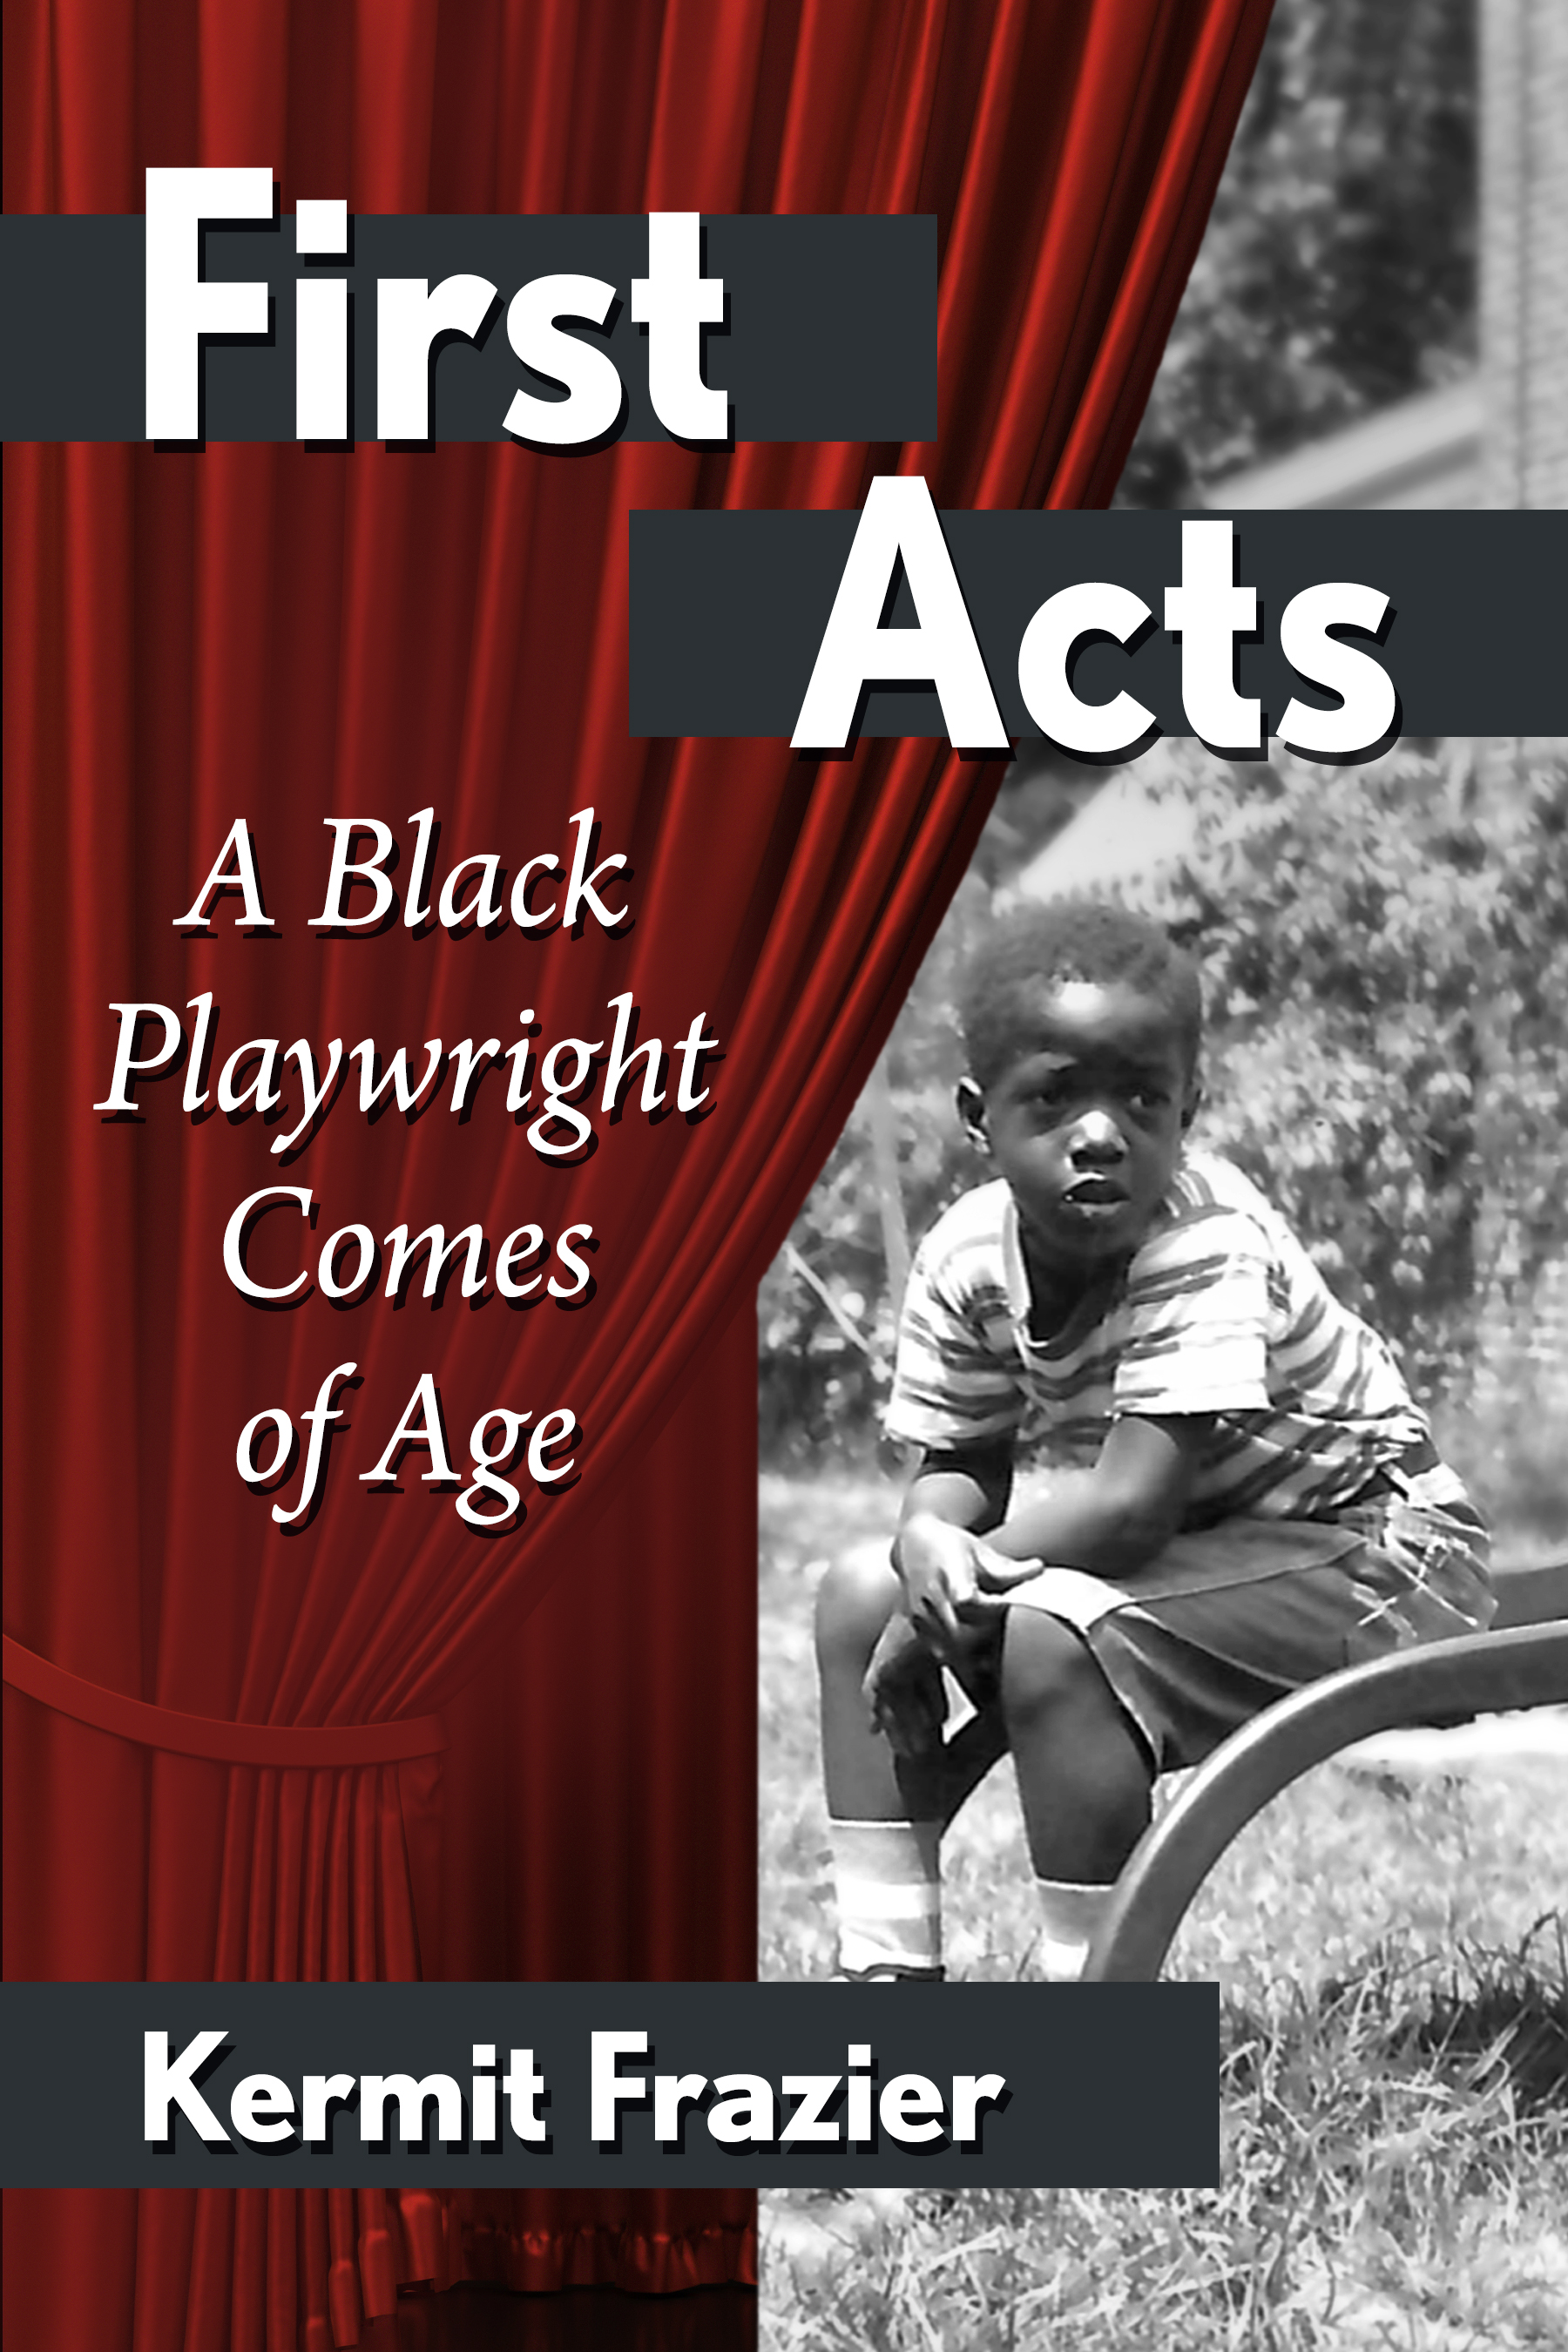 First Acts A Black Playwright Comes of Age - image 1